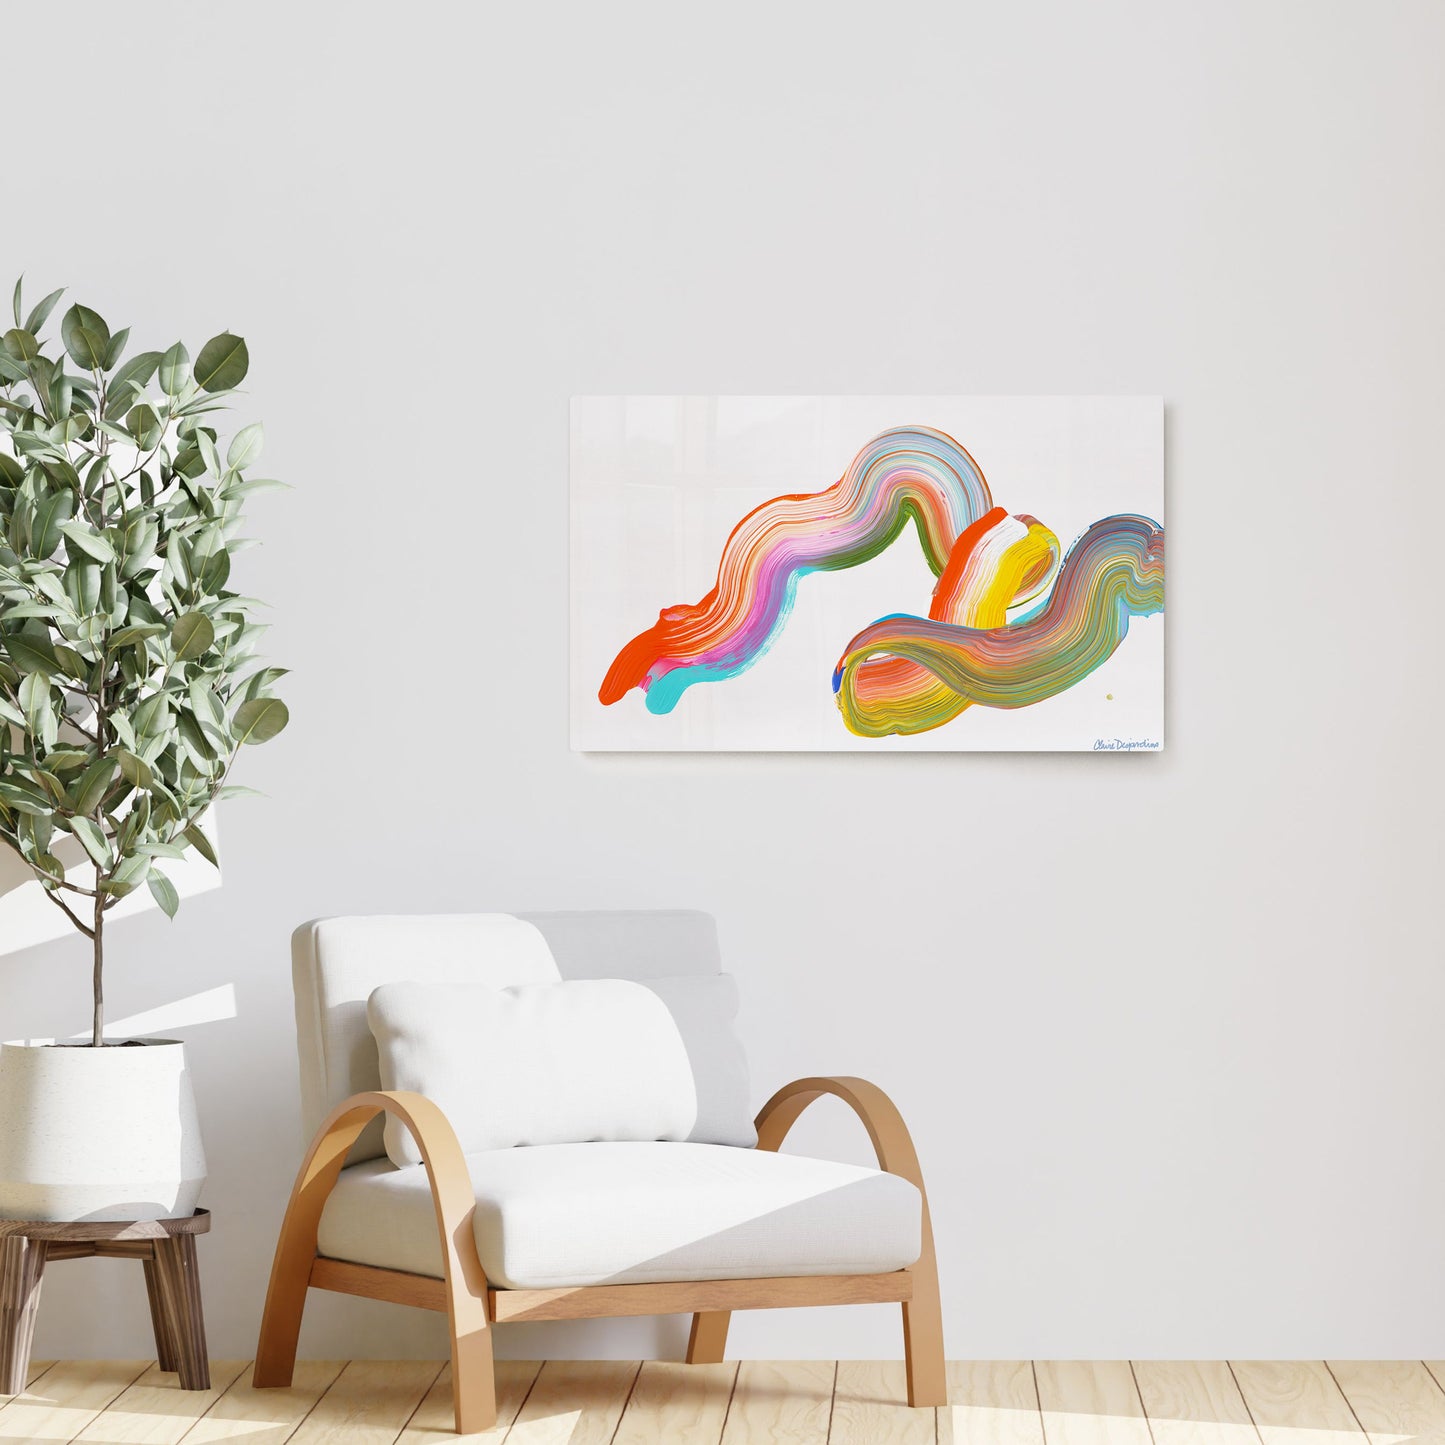 Claire Desjardins' Stepping Out painting reproduced on HD metal print and displayed on wall